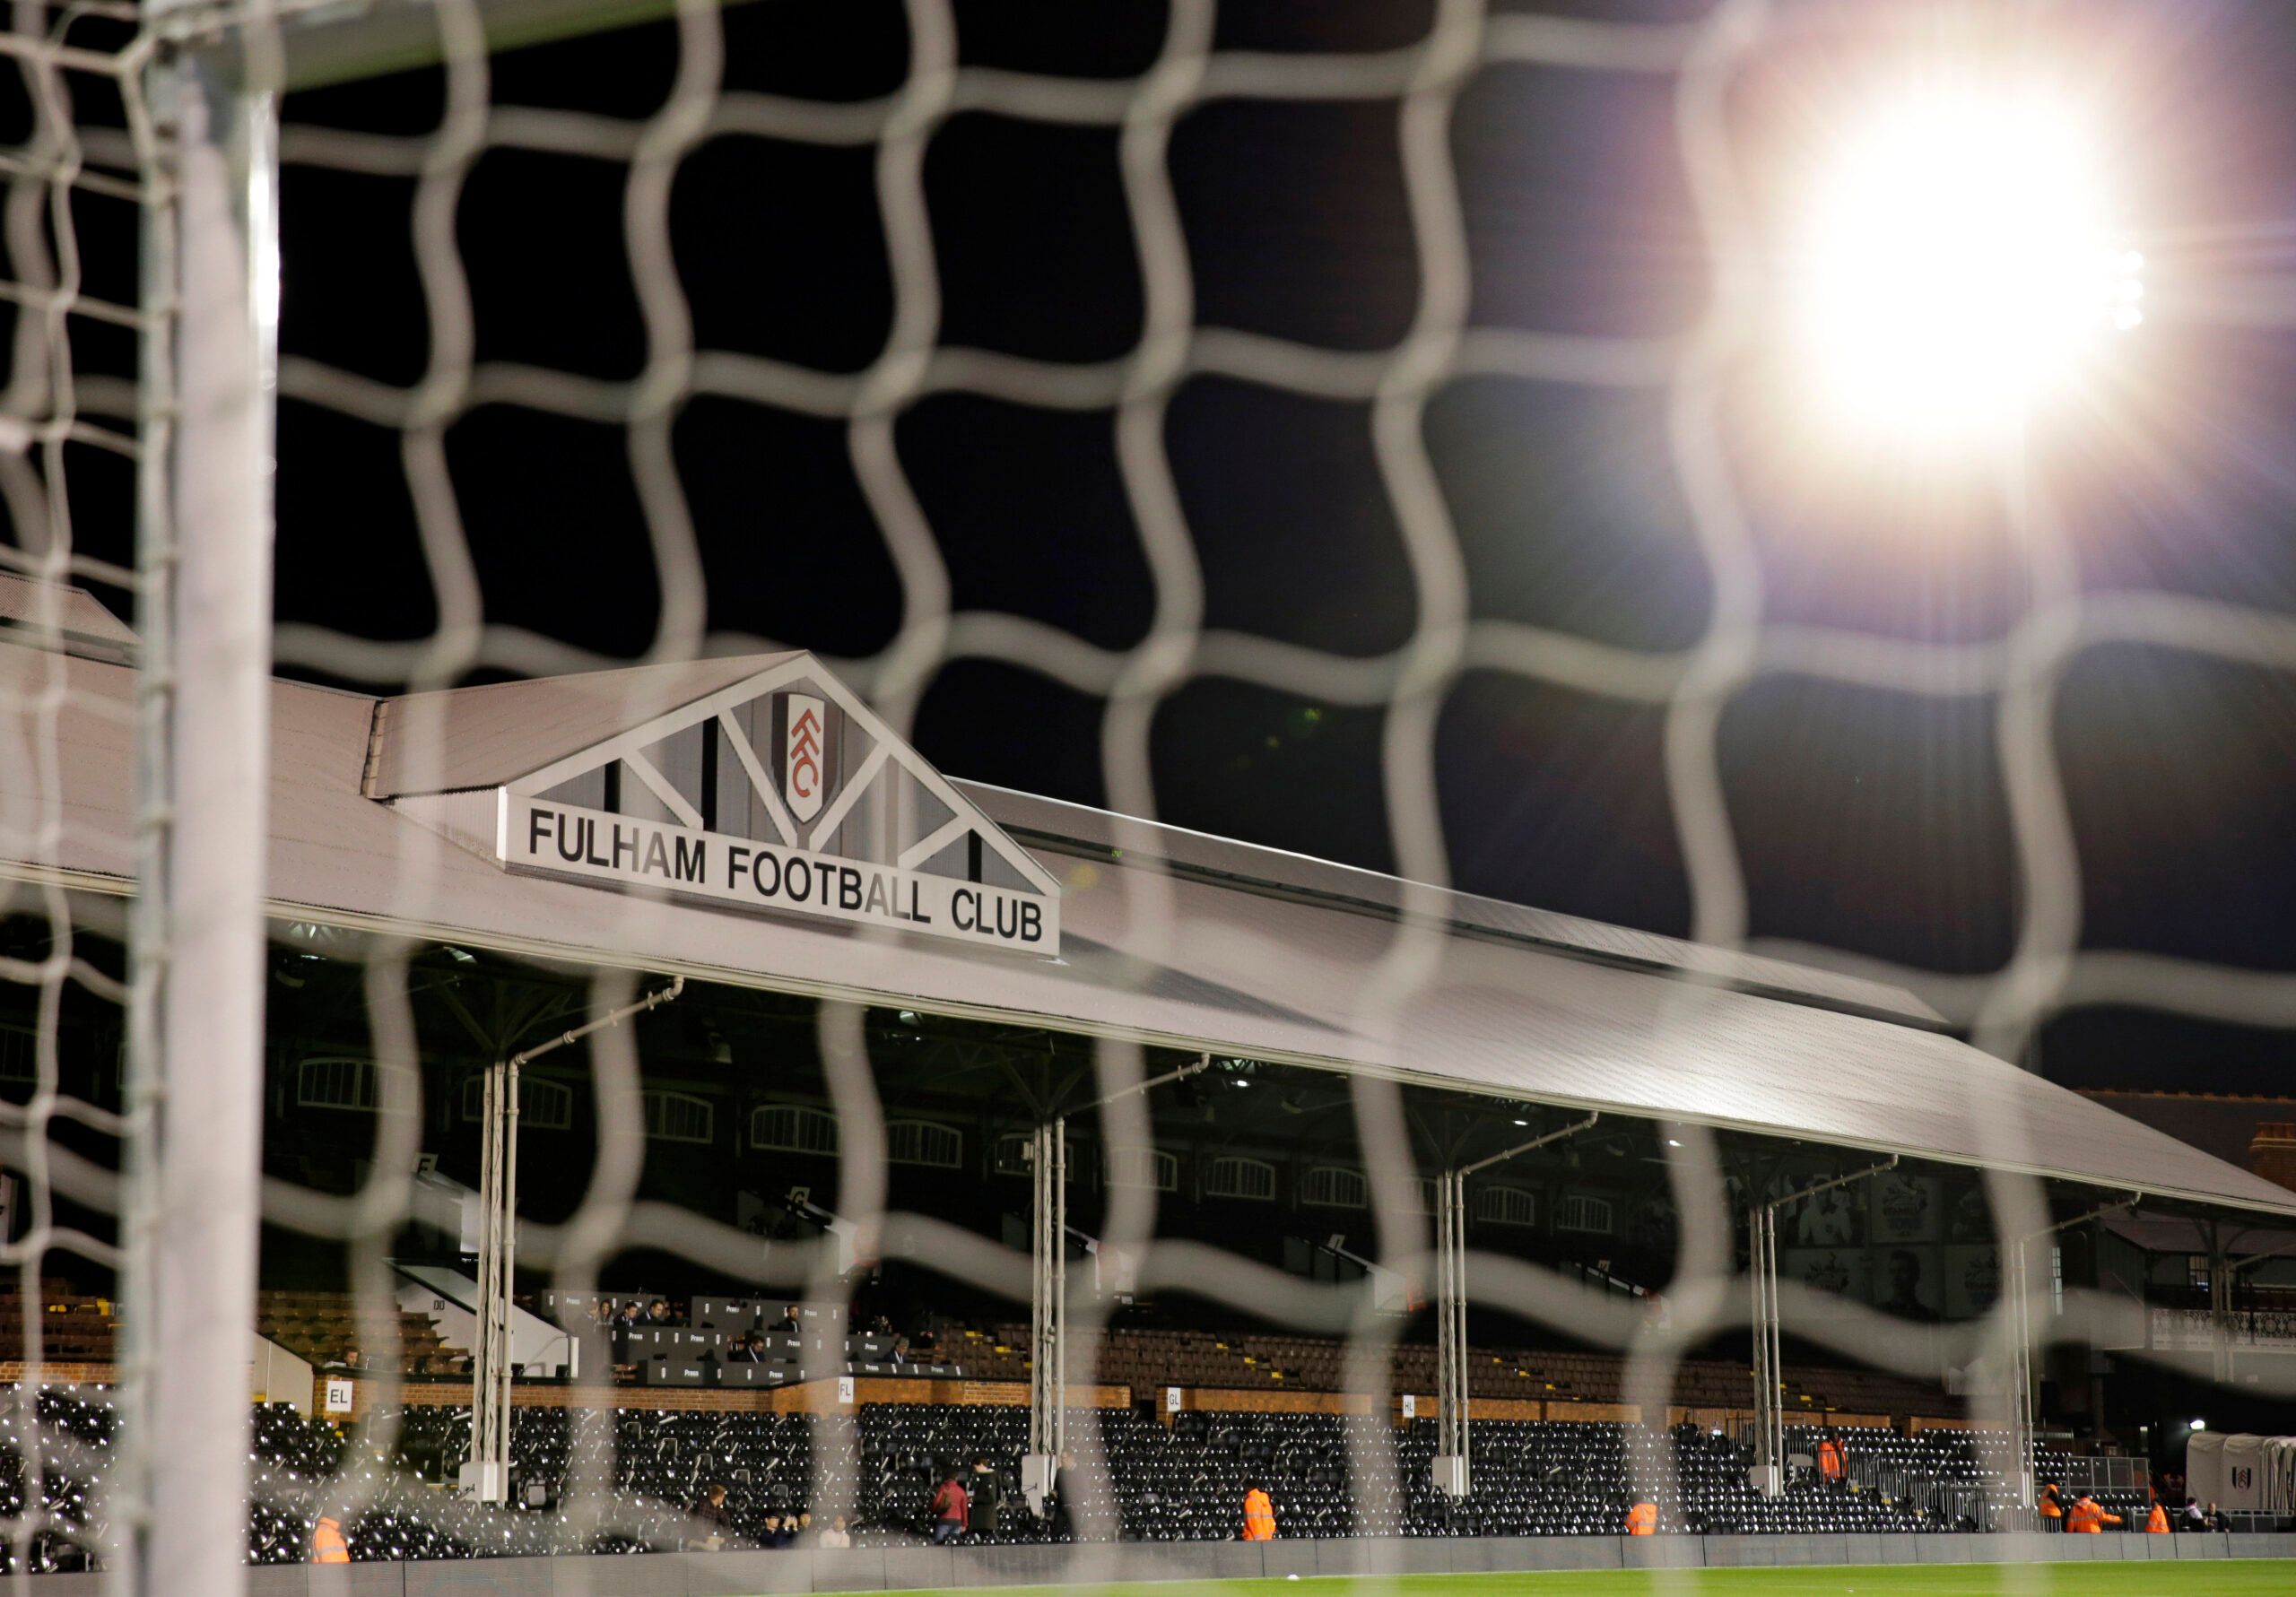 Britain Soccer Football - Fulham v Norwich City - Sky Bet Championship - Craven Cottage - 18/10/16
General view of Craven Cottage
Mandatory Credit: Action Images / Henry Browne
Livepic
EDITORIAL USE ONLY.